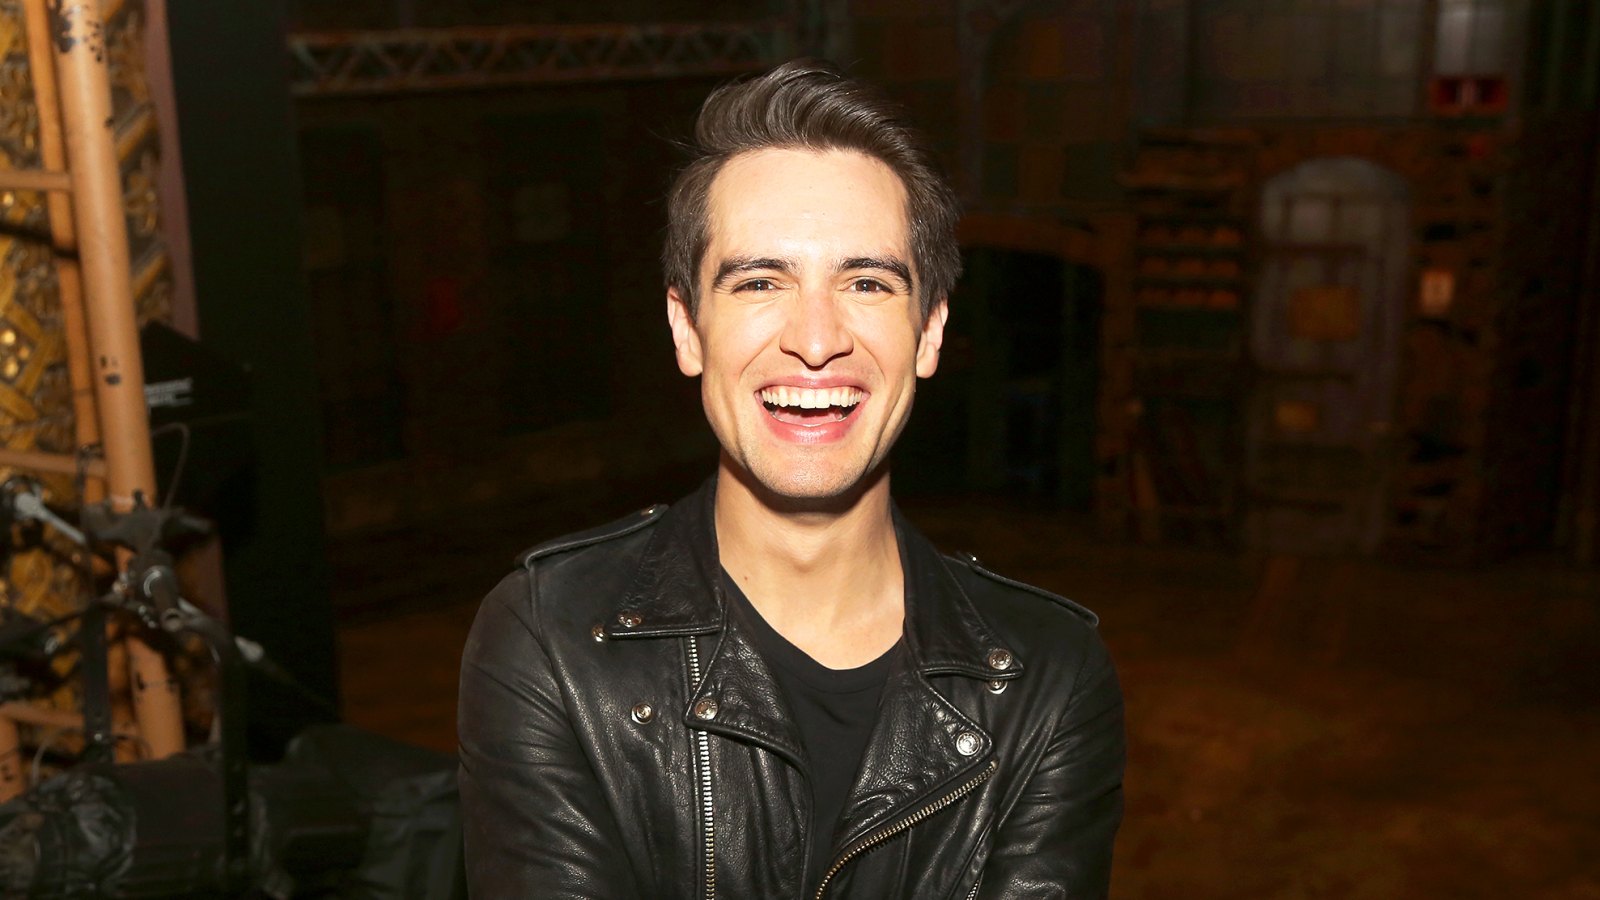 Brendon Urie poses at a photo call for his broadway debut in the hit musical "Kinky Boots" on Broadway at The Al Hirschfeld Theatre in New York City.